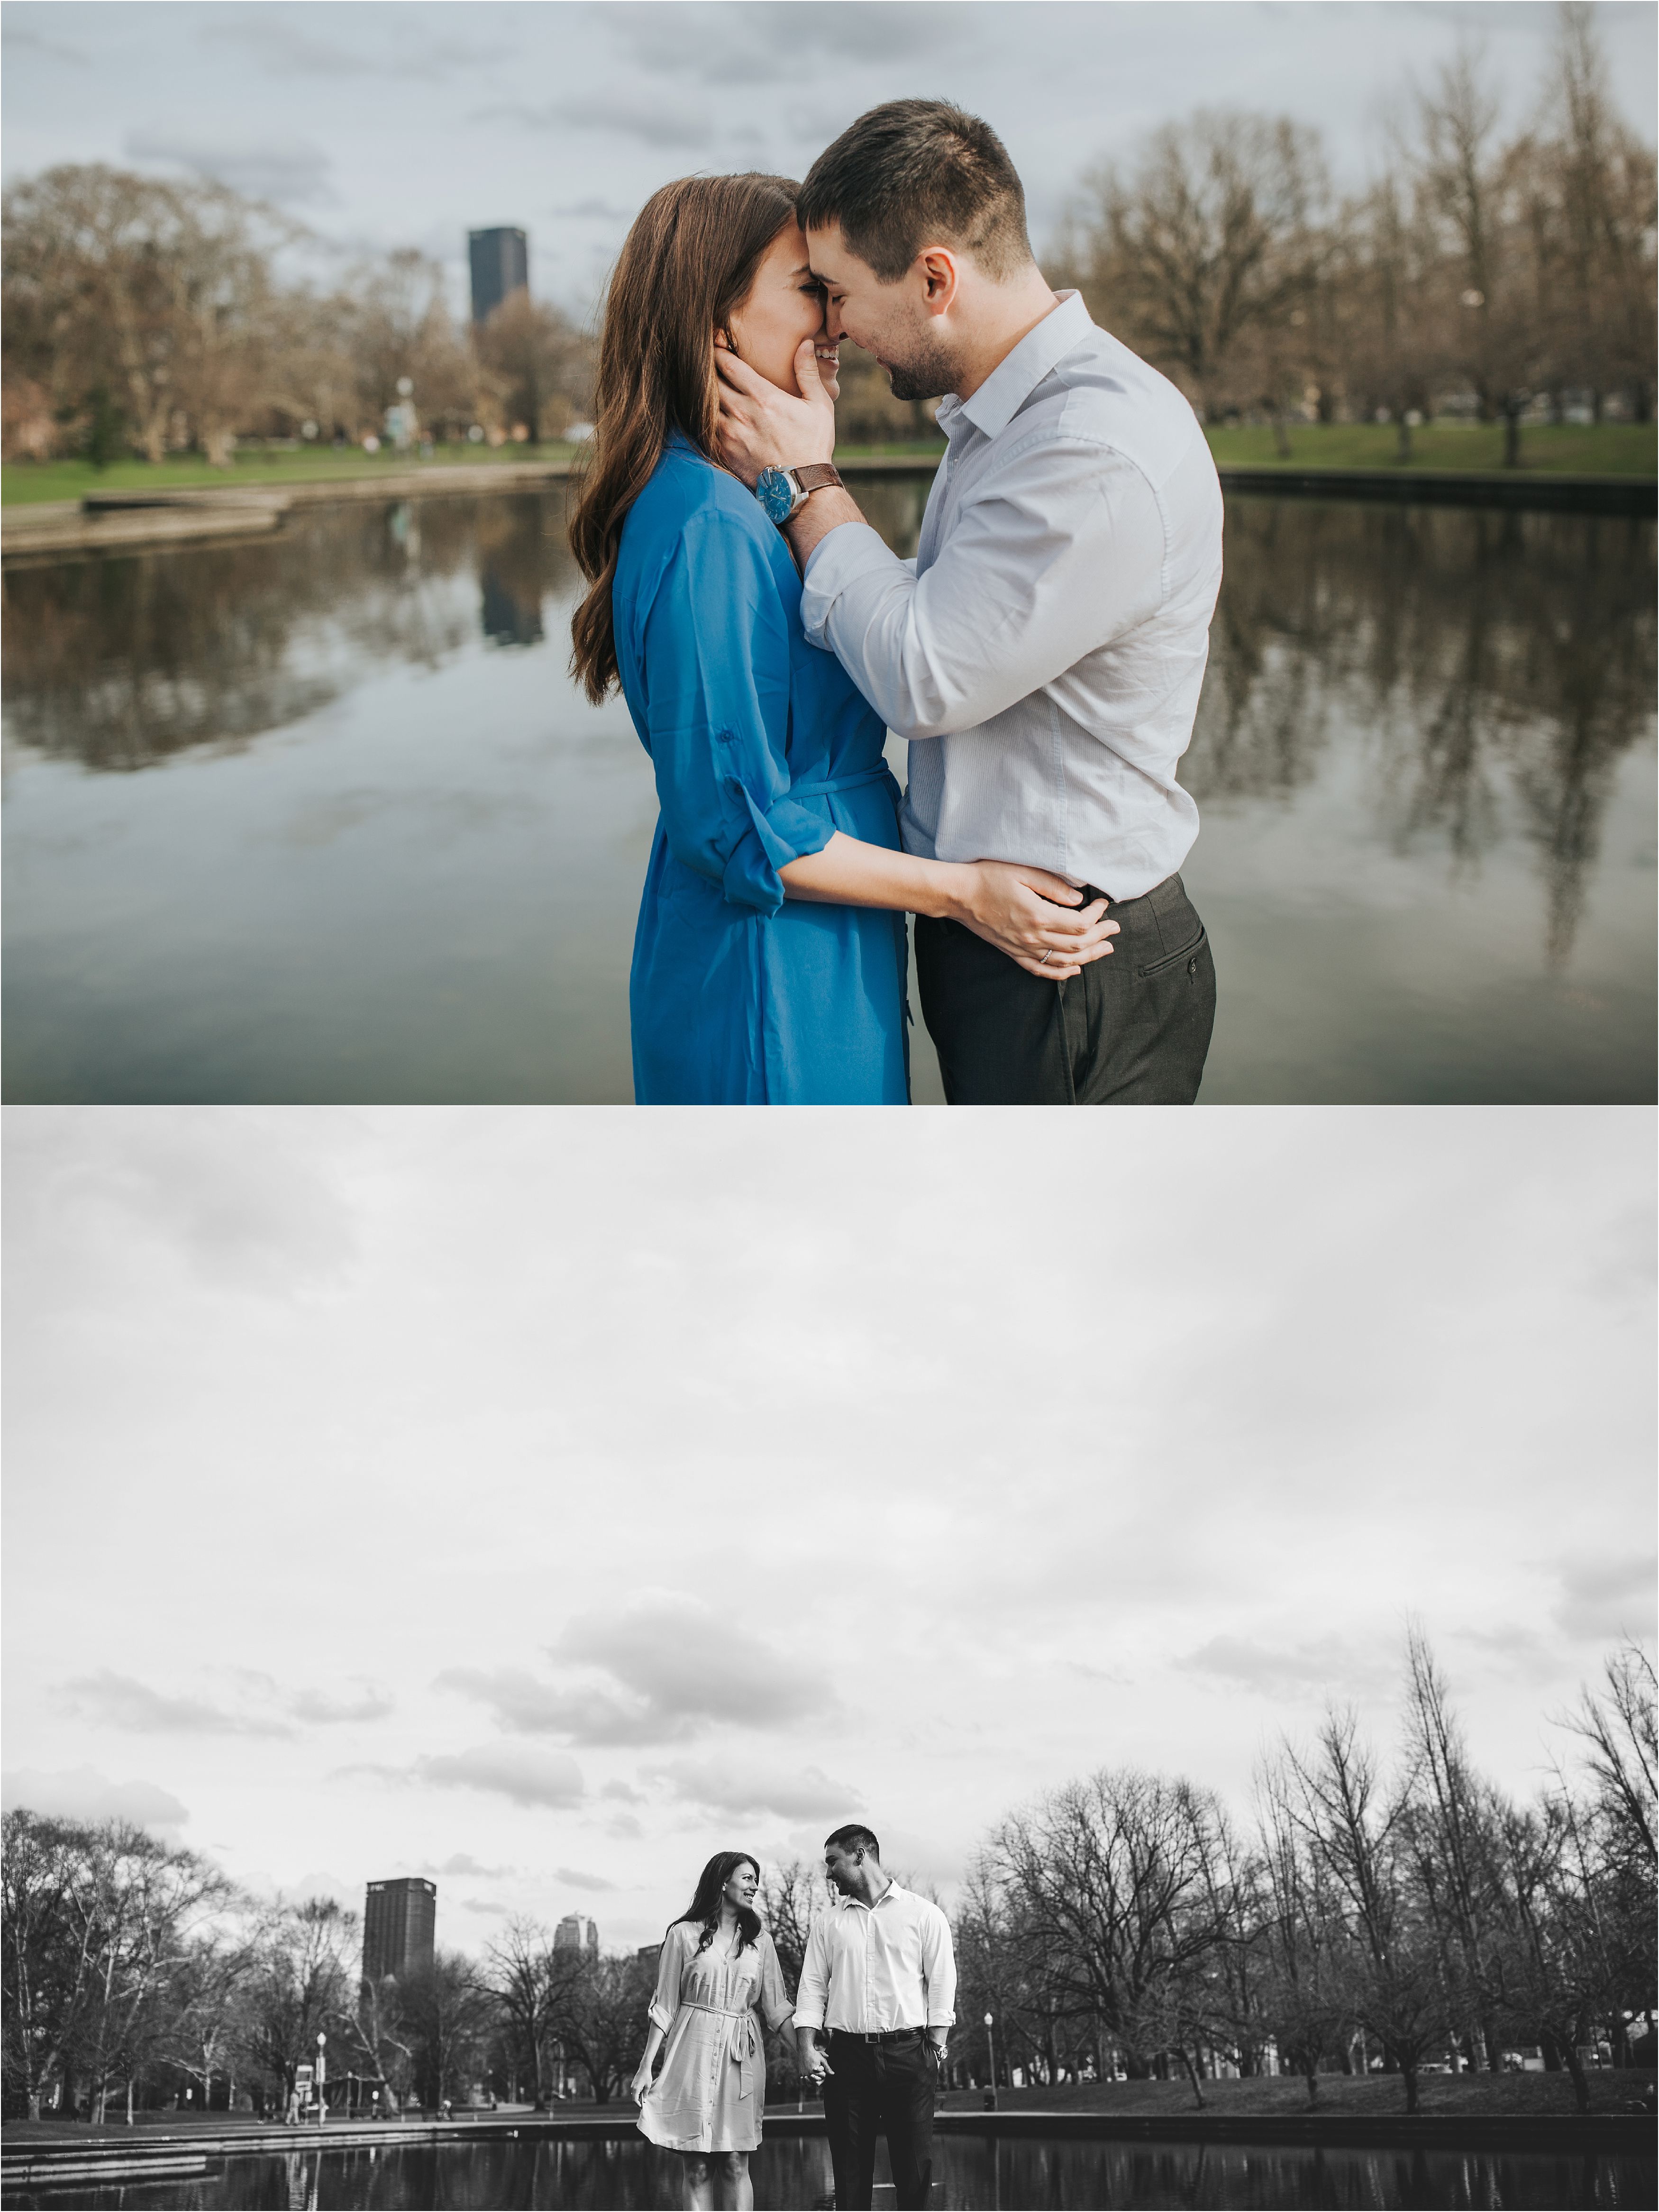 2-north side engagement session - pittsburgh photographer - oakwood photo + video.jpg